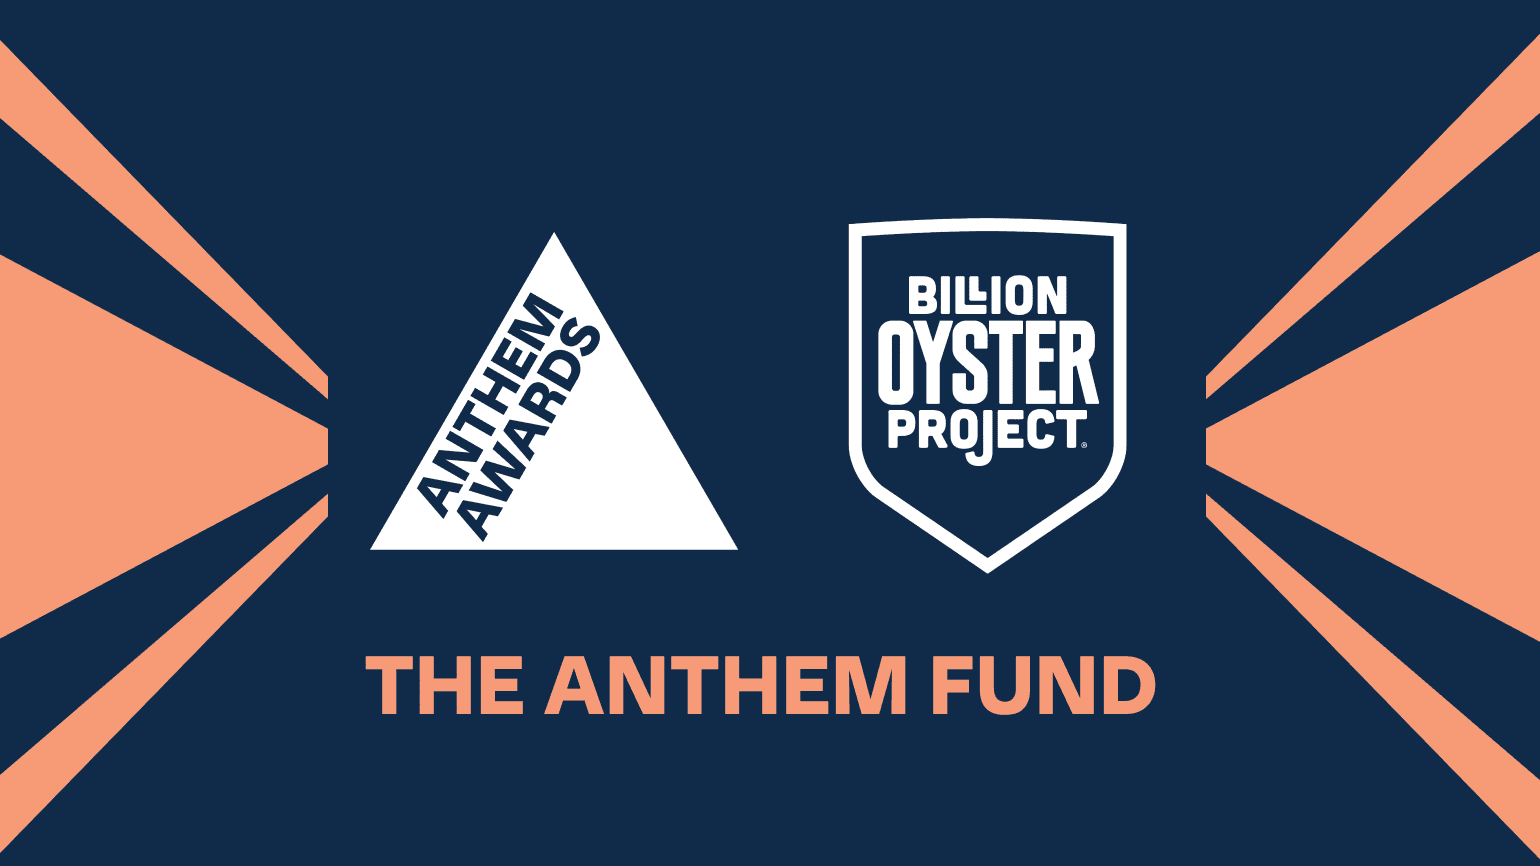 Text reads: The Anthem Fund. Image: A logo for The Anthem Awards and a logo for Billion Oyster Project